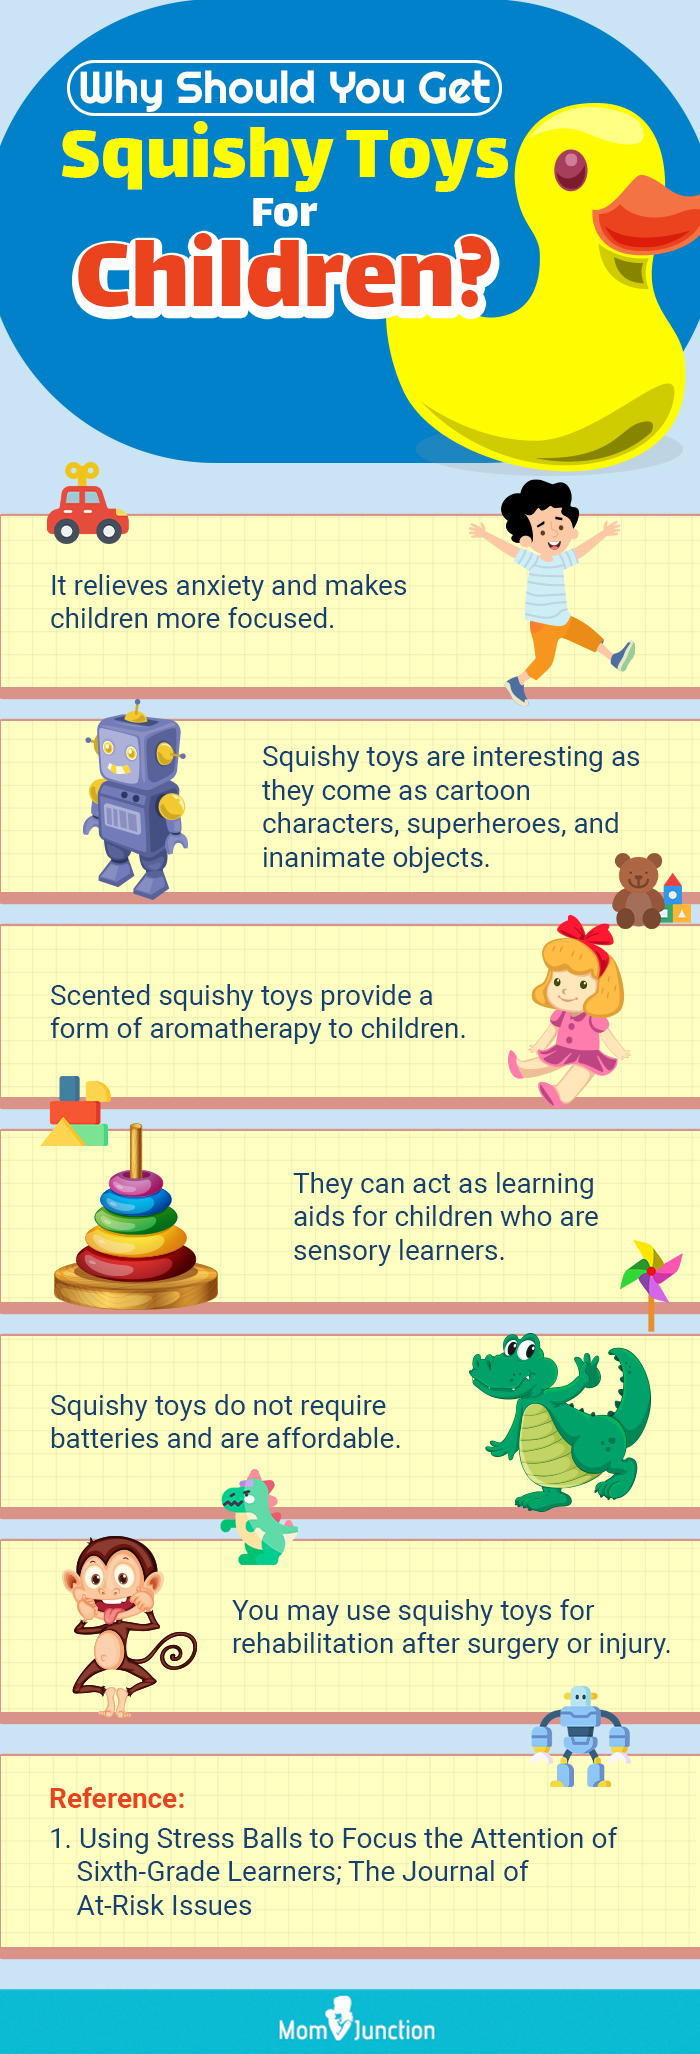 Why Should You Get Squishy Toys For Children